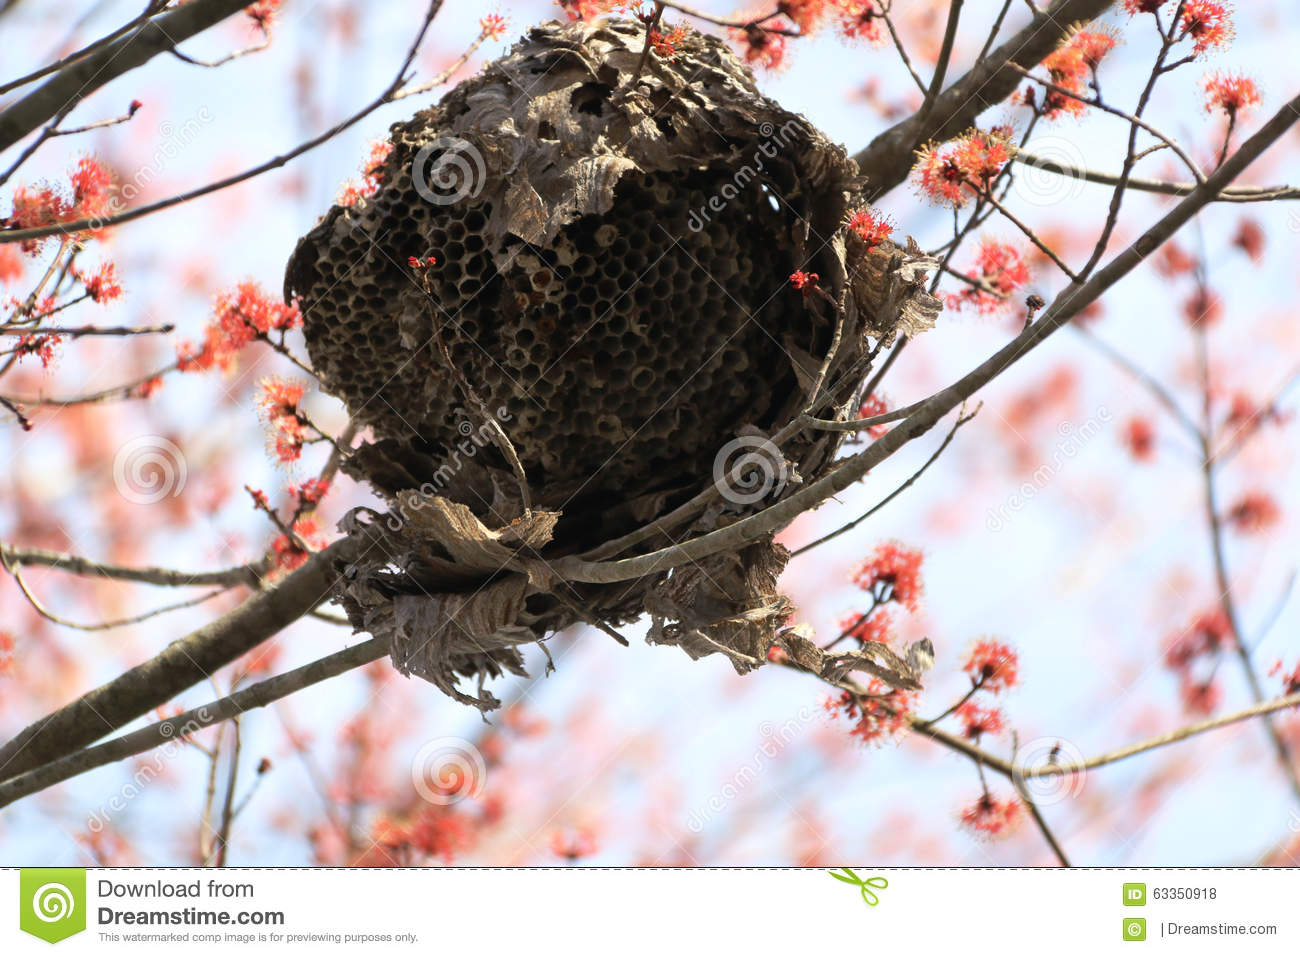 Hornets Nest High In A Tree With Spring Flowers All Around